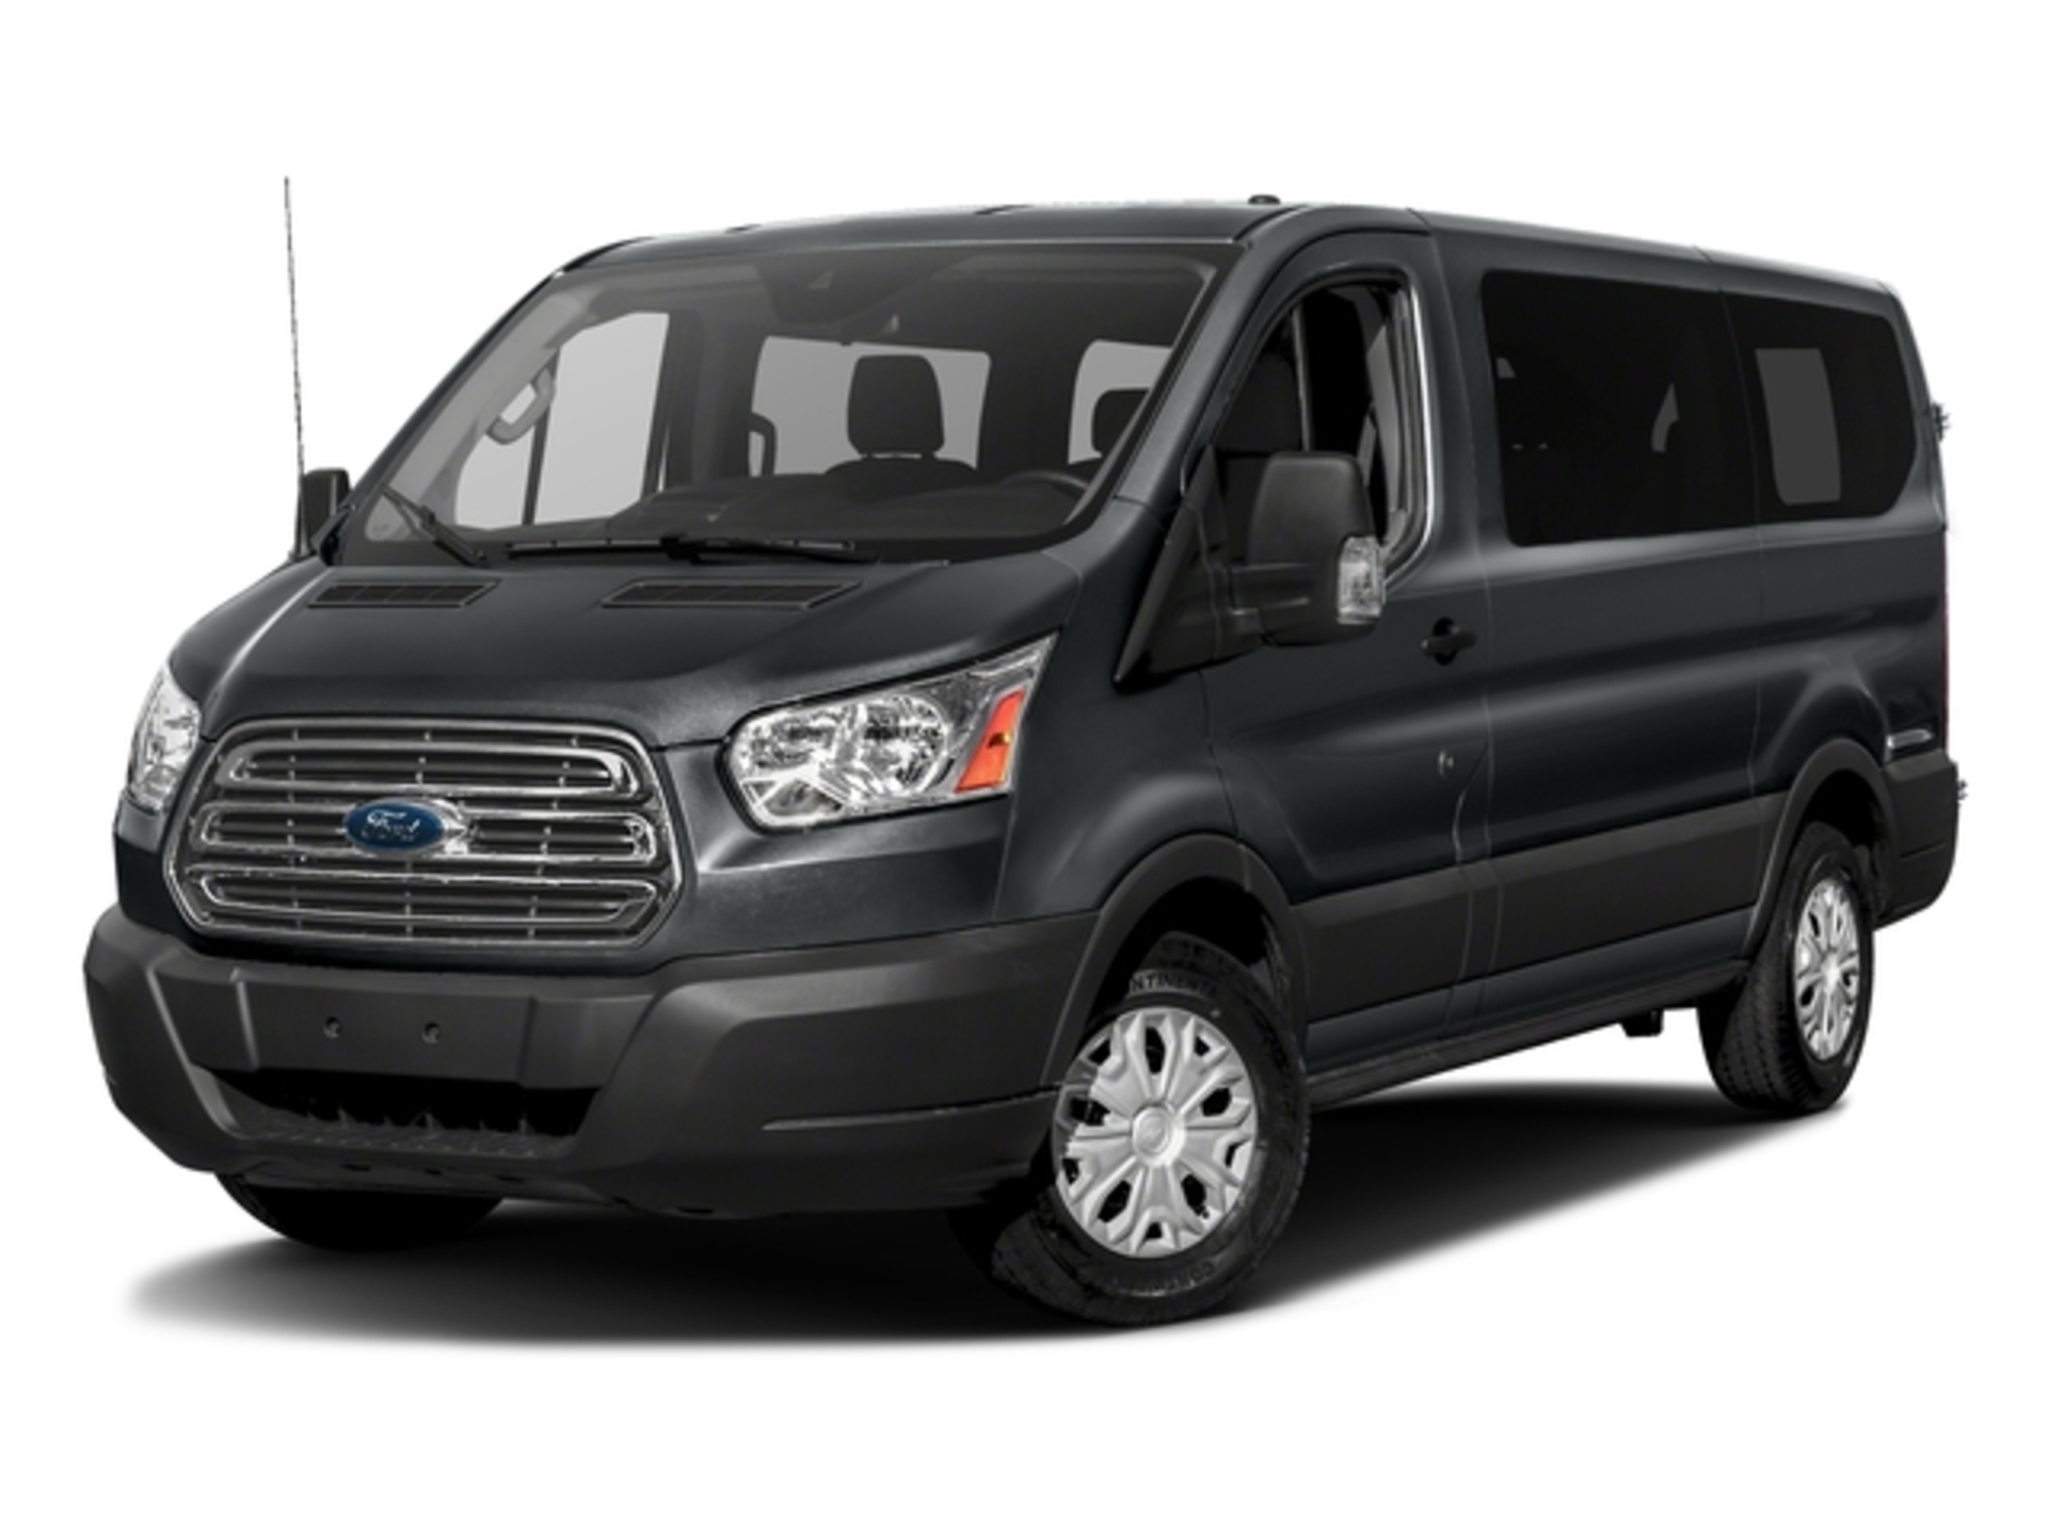 2018 Ford Transit Passenger Wagon - Prices, Trims, Options, Specs ...